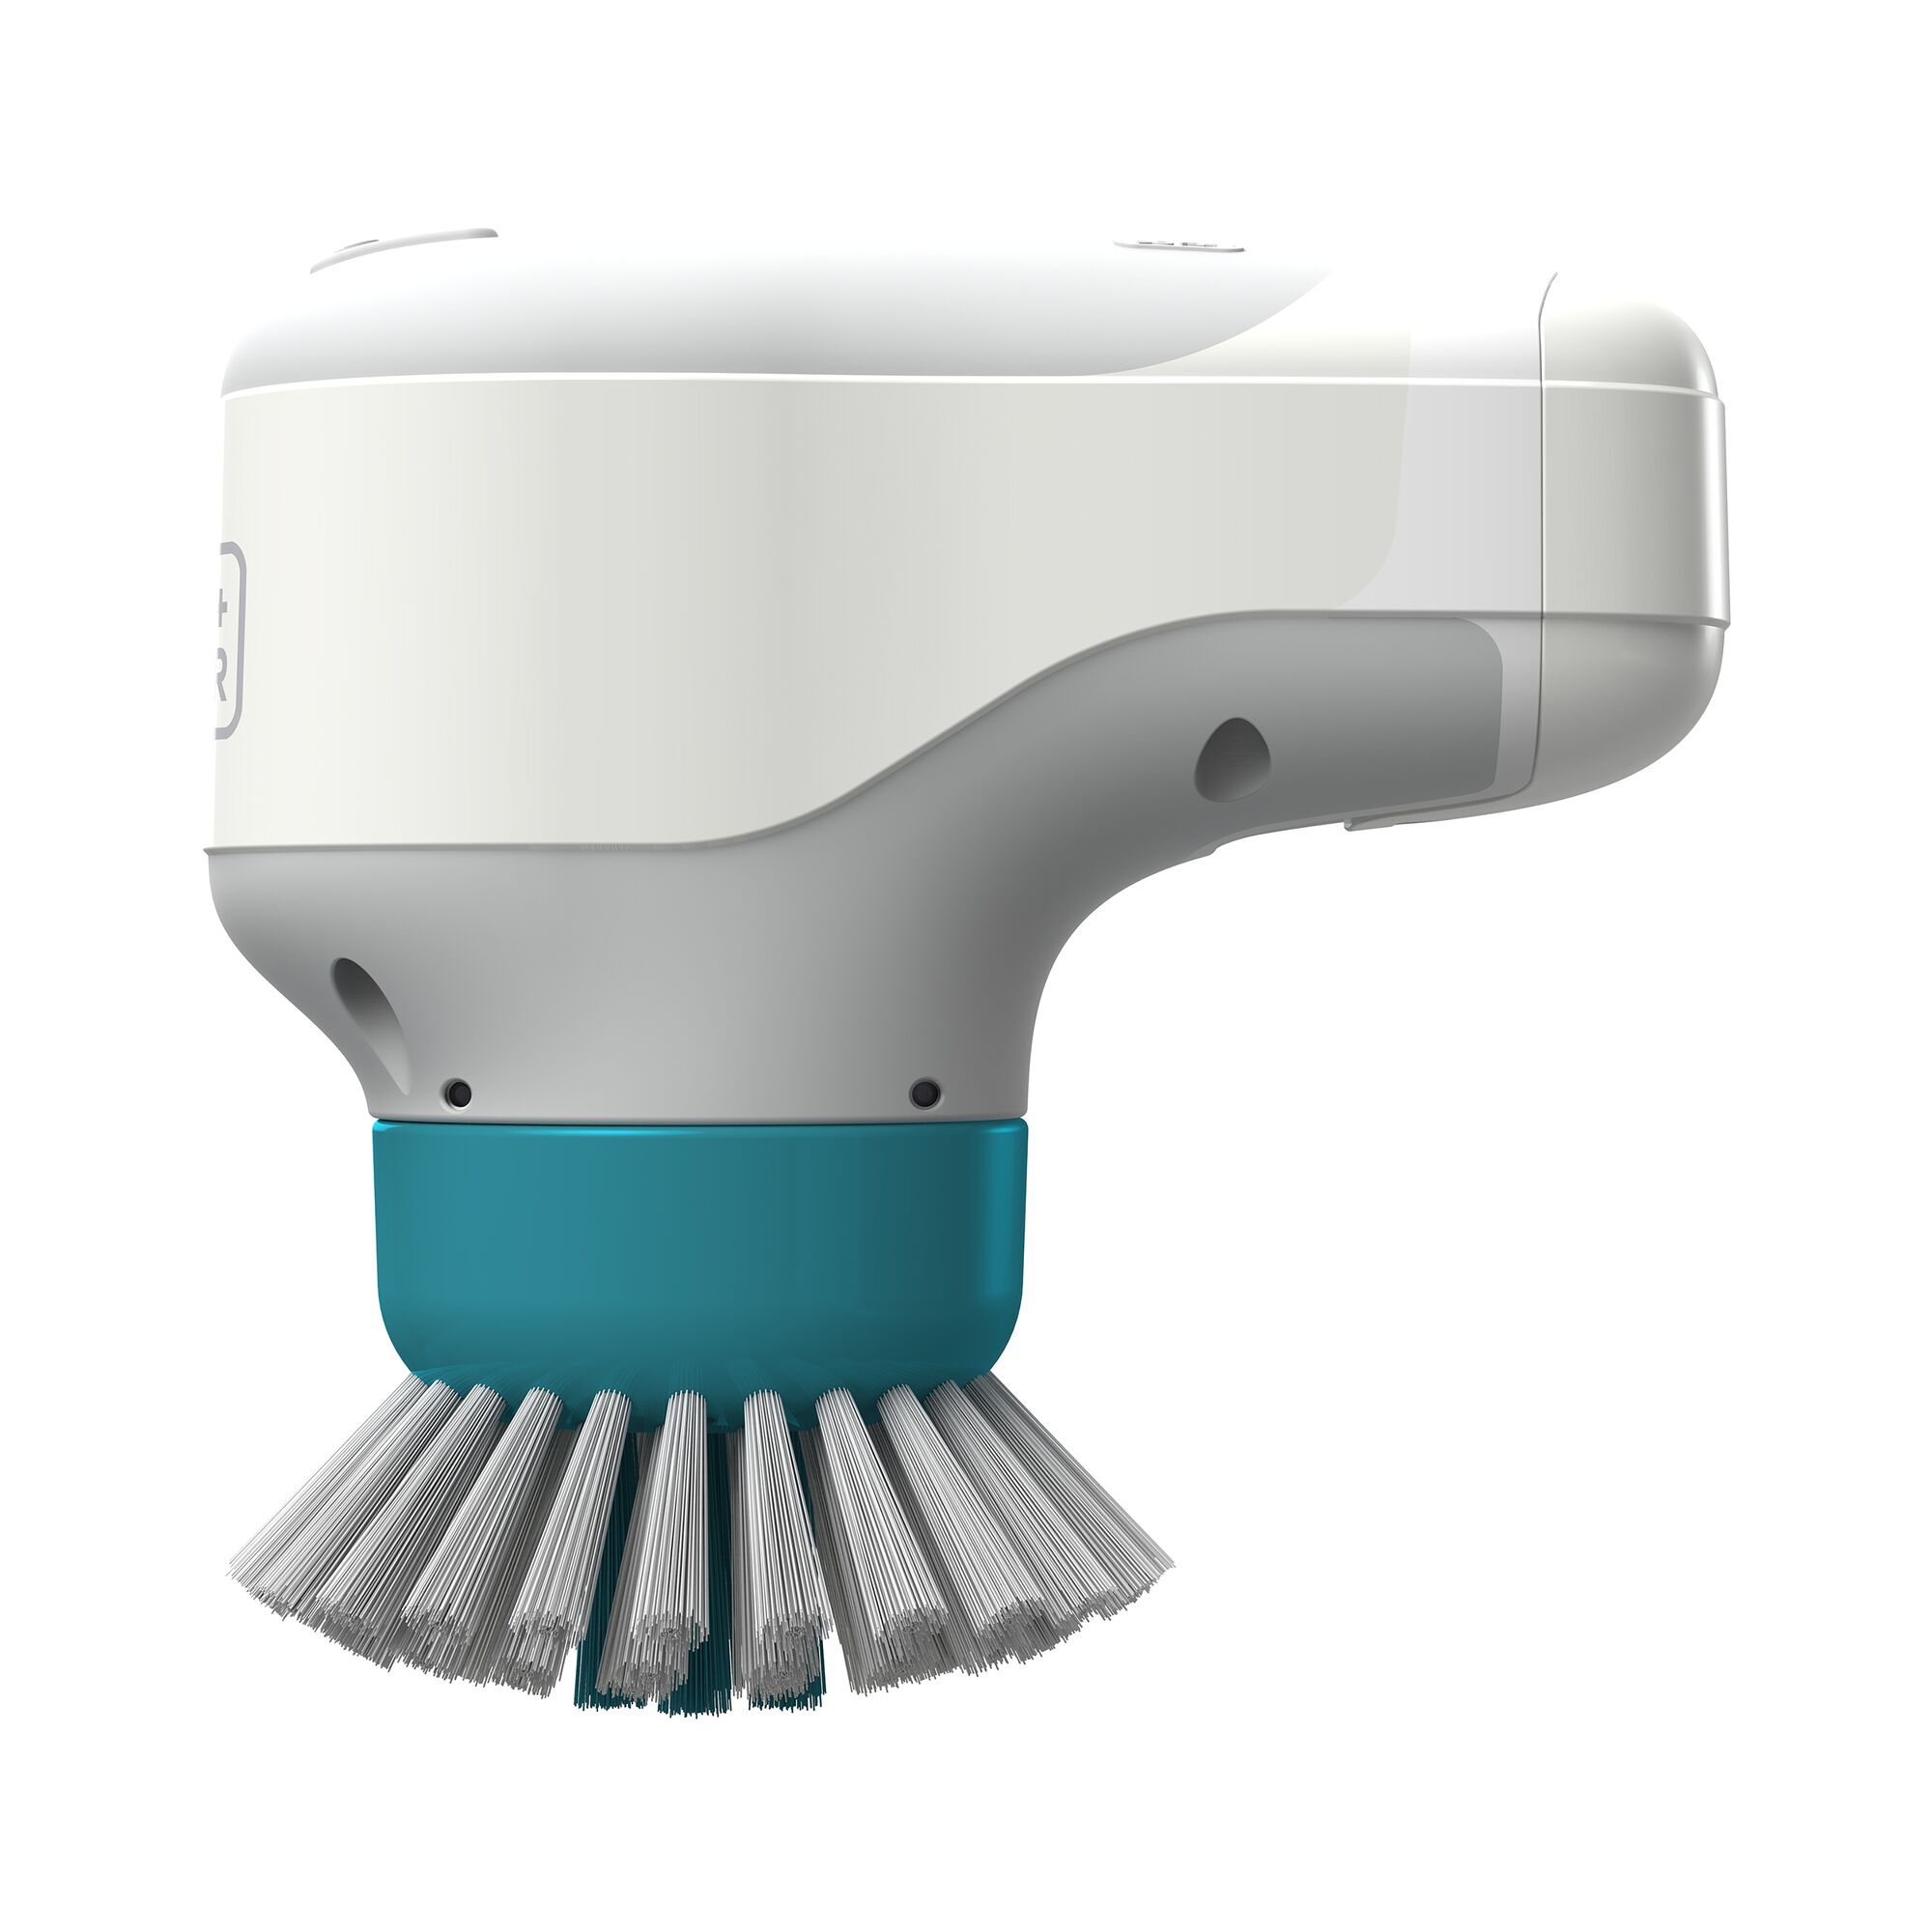 Profile of Grimebuster powered scrubber.